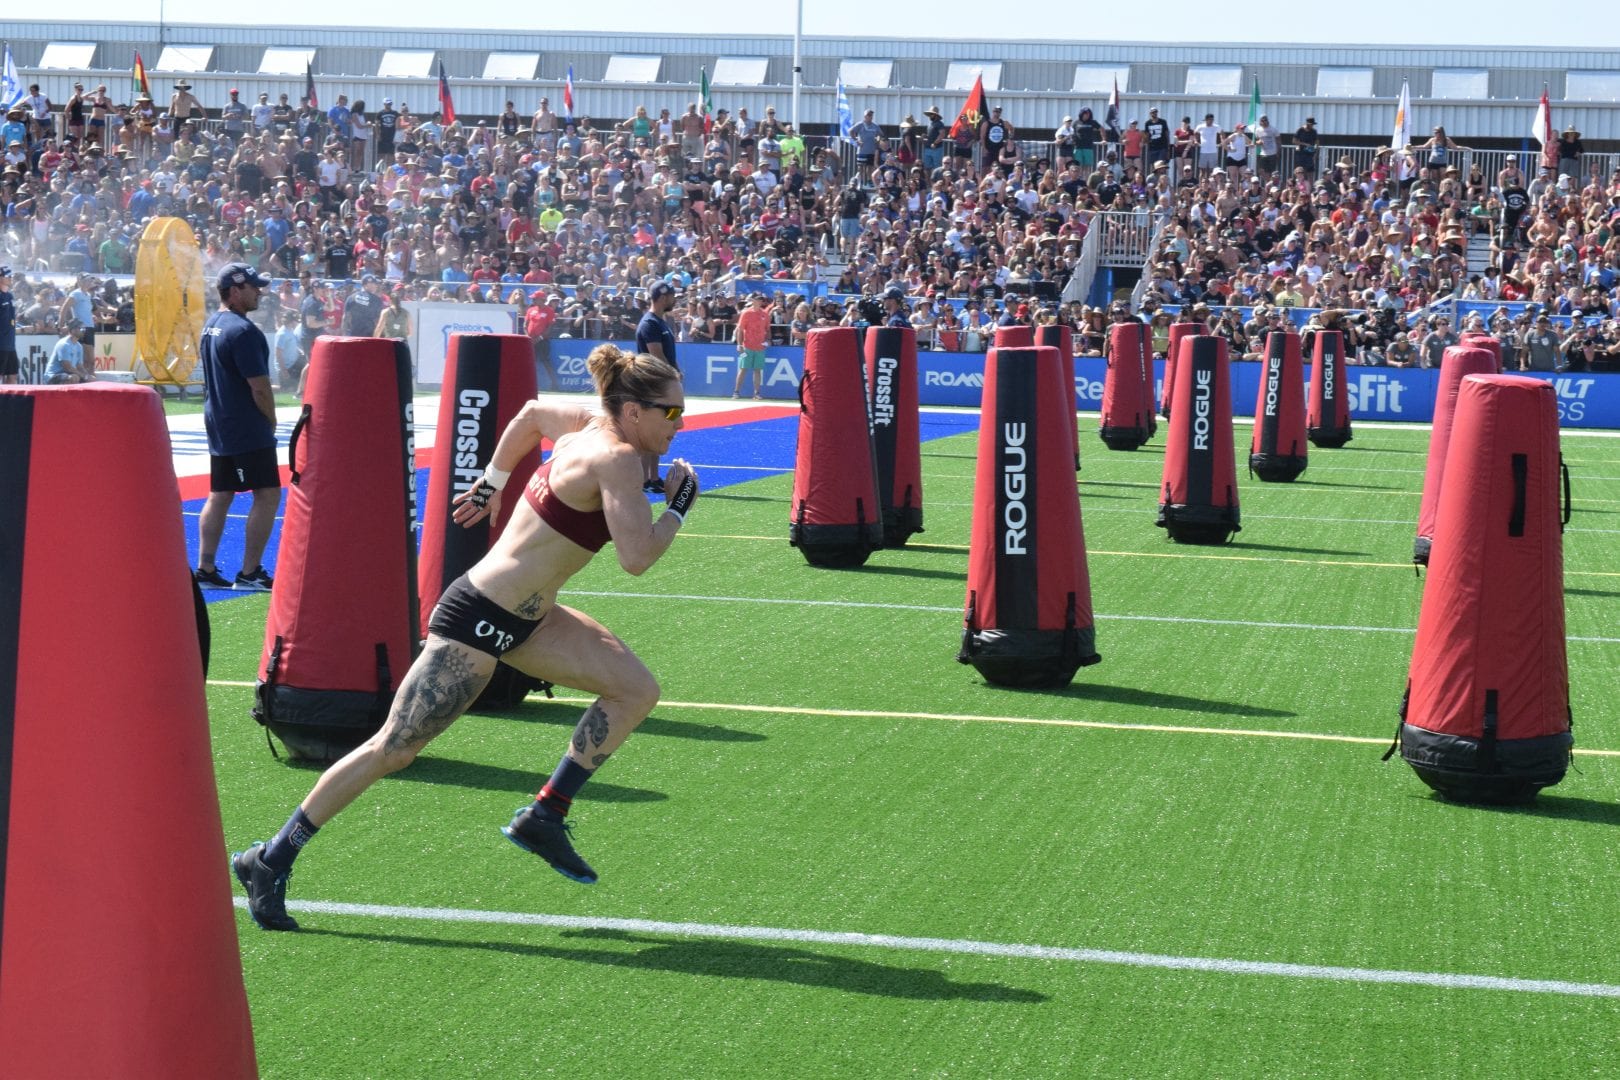 013 - Sam Briggs of the United Kingdom races in a heat of the Sprint event at the 2019 CrossFit Games